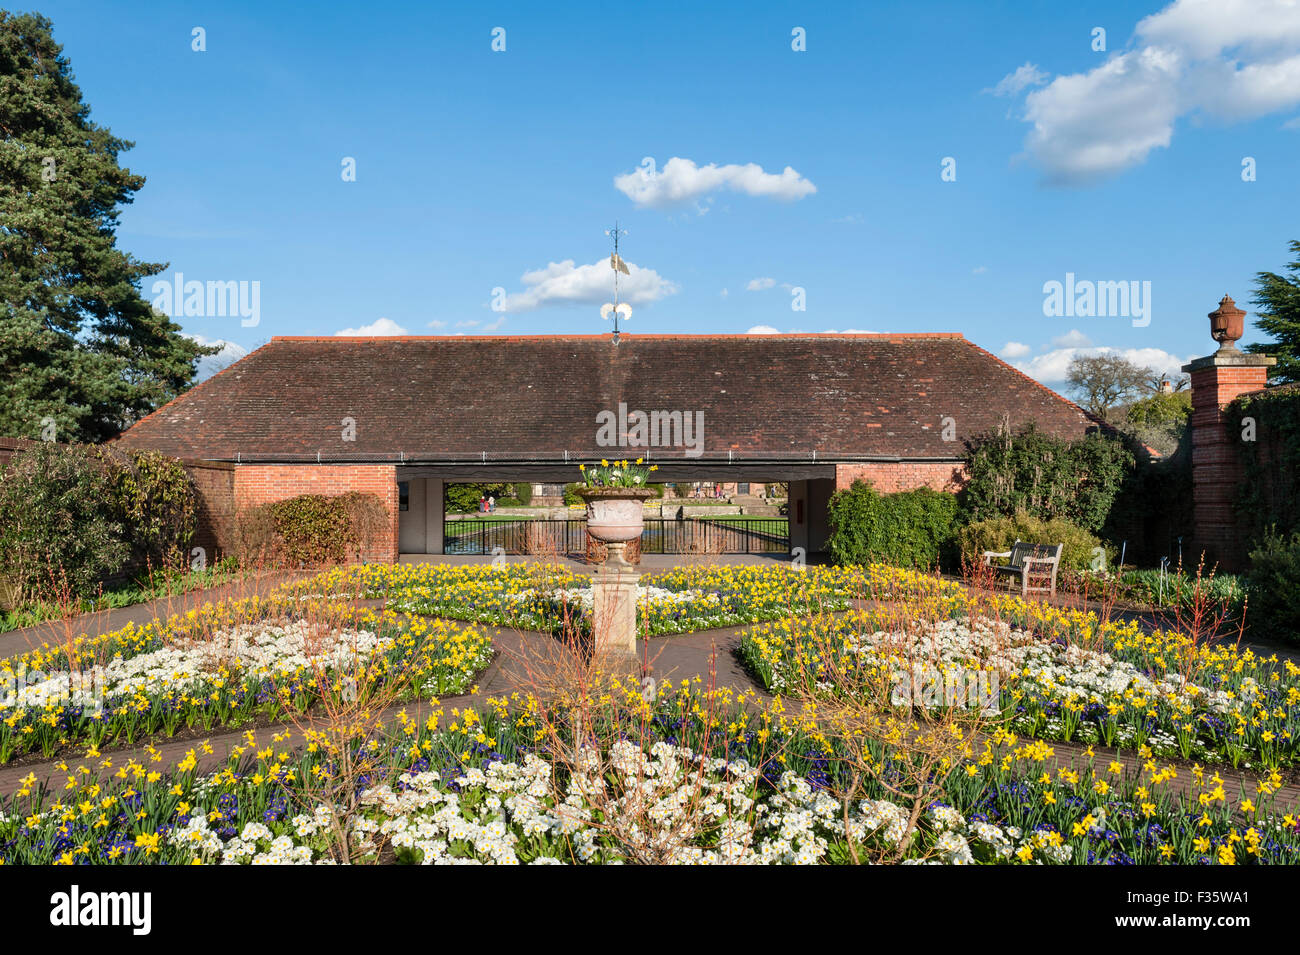 The Royal Horticultural Society (RHS) gardens at Wisley, Surrey, UK. Daffodils and dogwood in spring Stock Photo